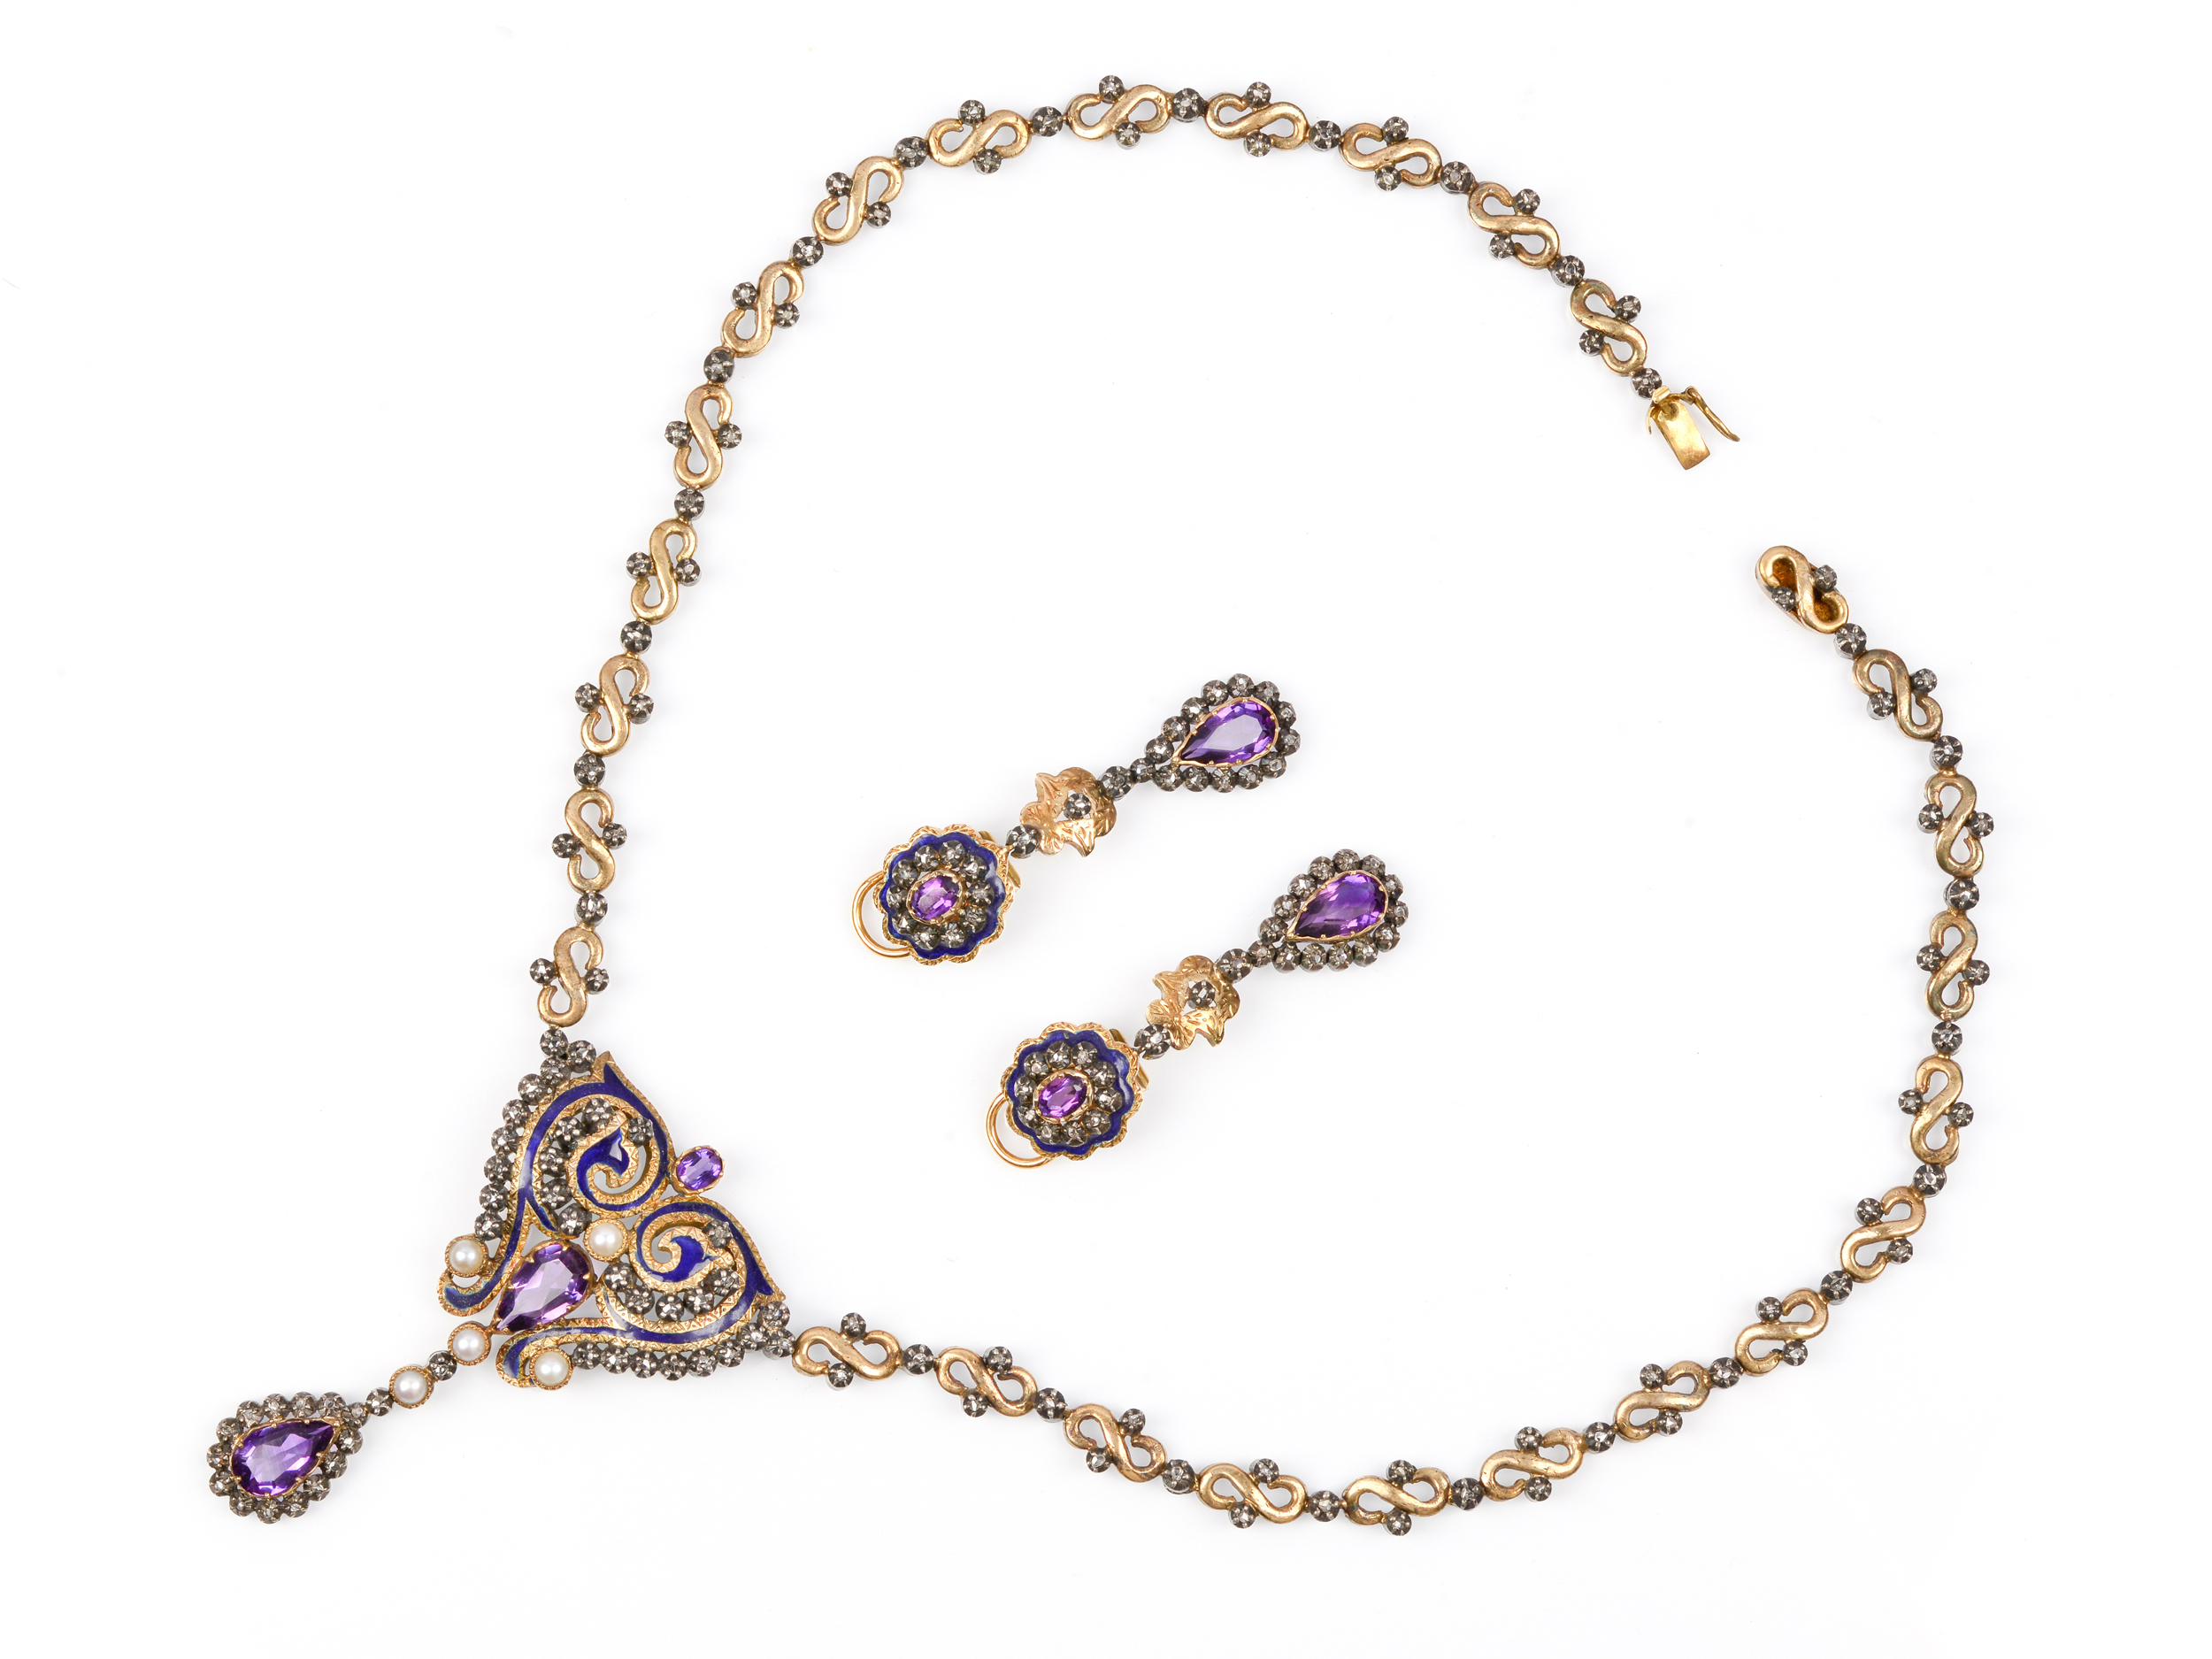 Set: necklace and 1 pair of earrings, England, Mid-19th century - Image 2 of 6